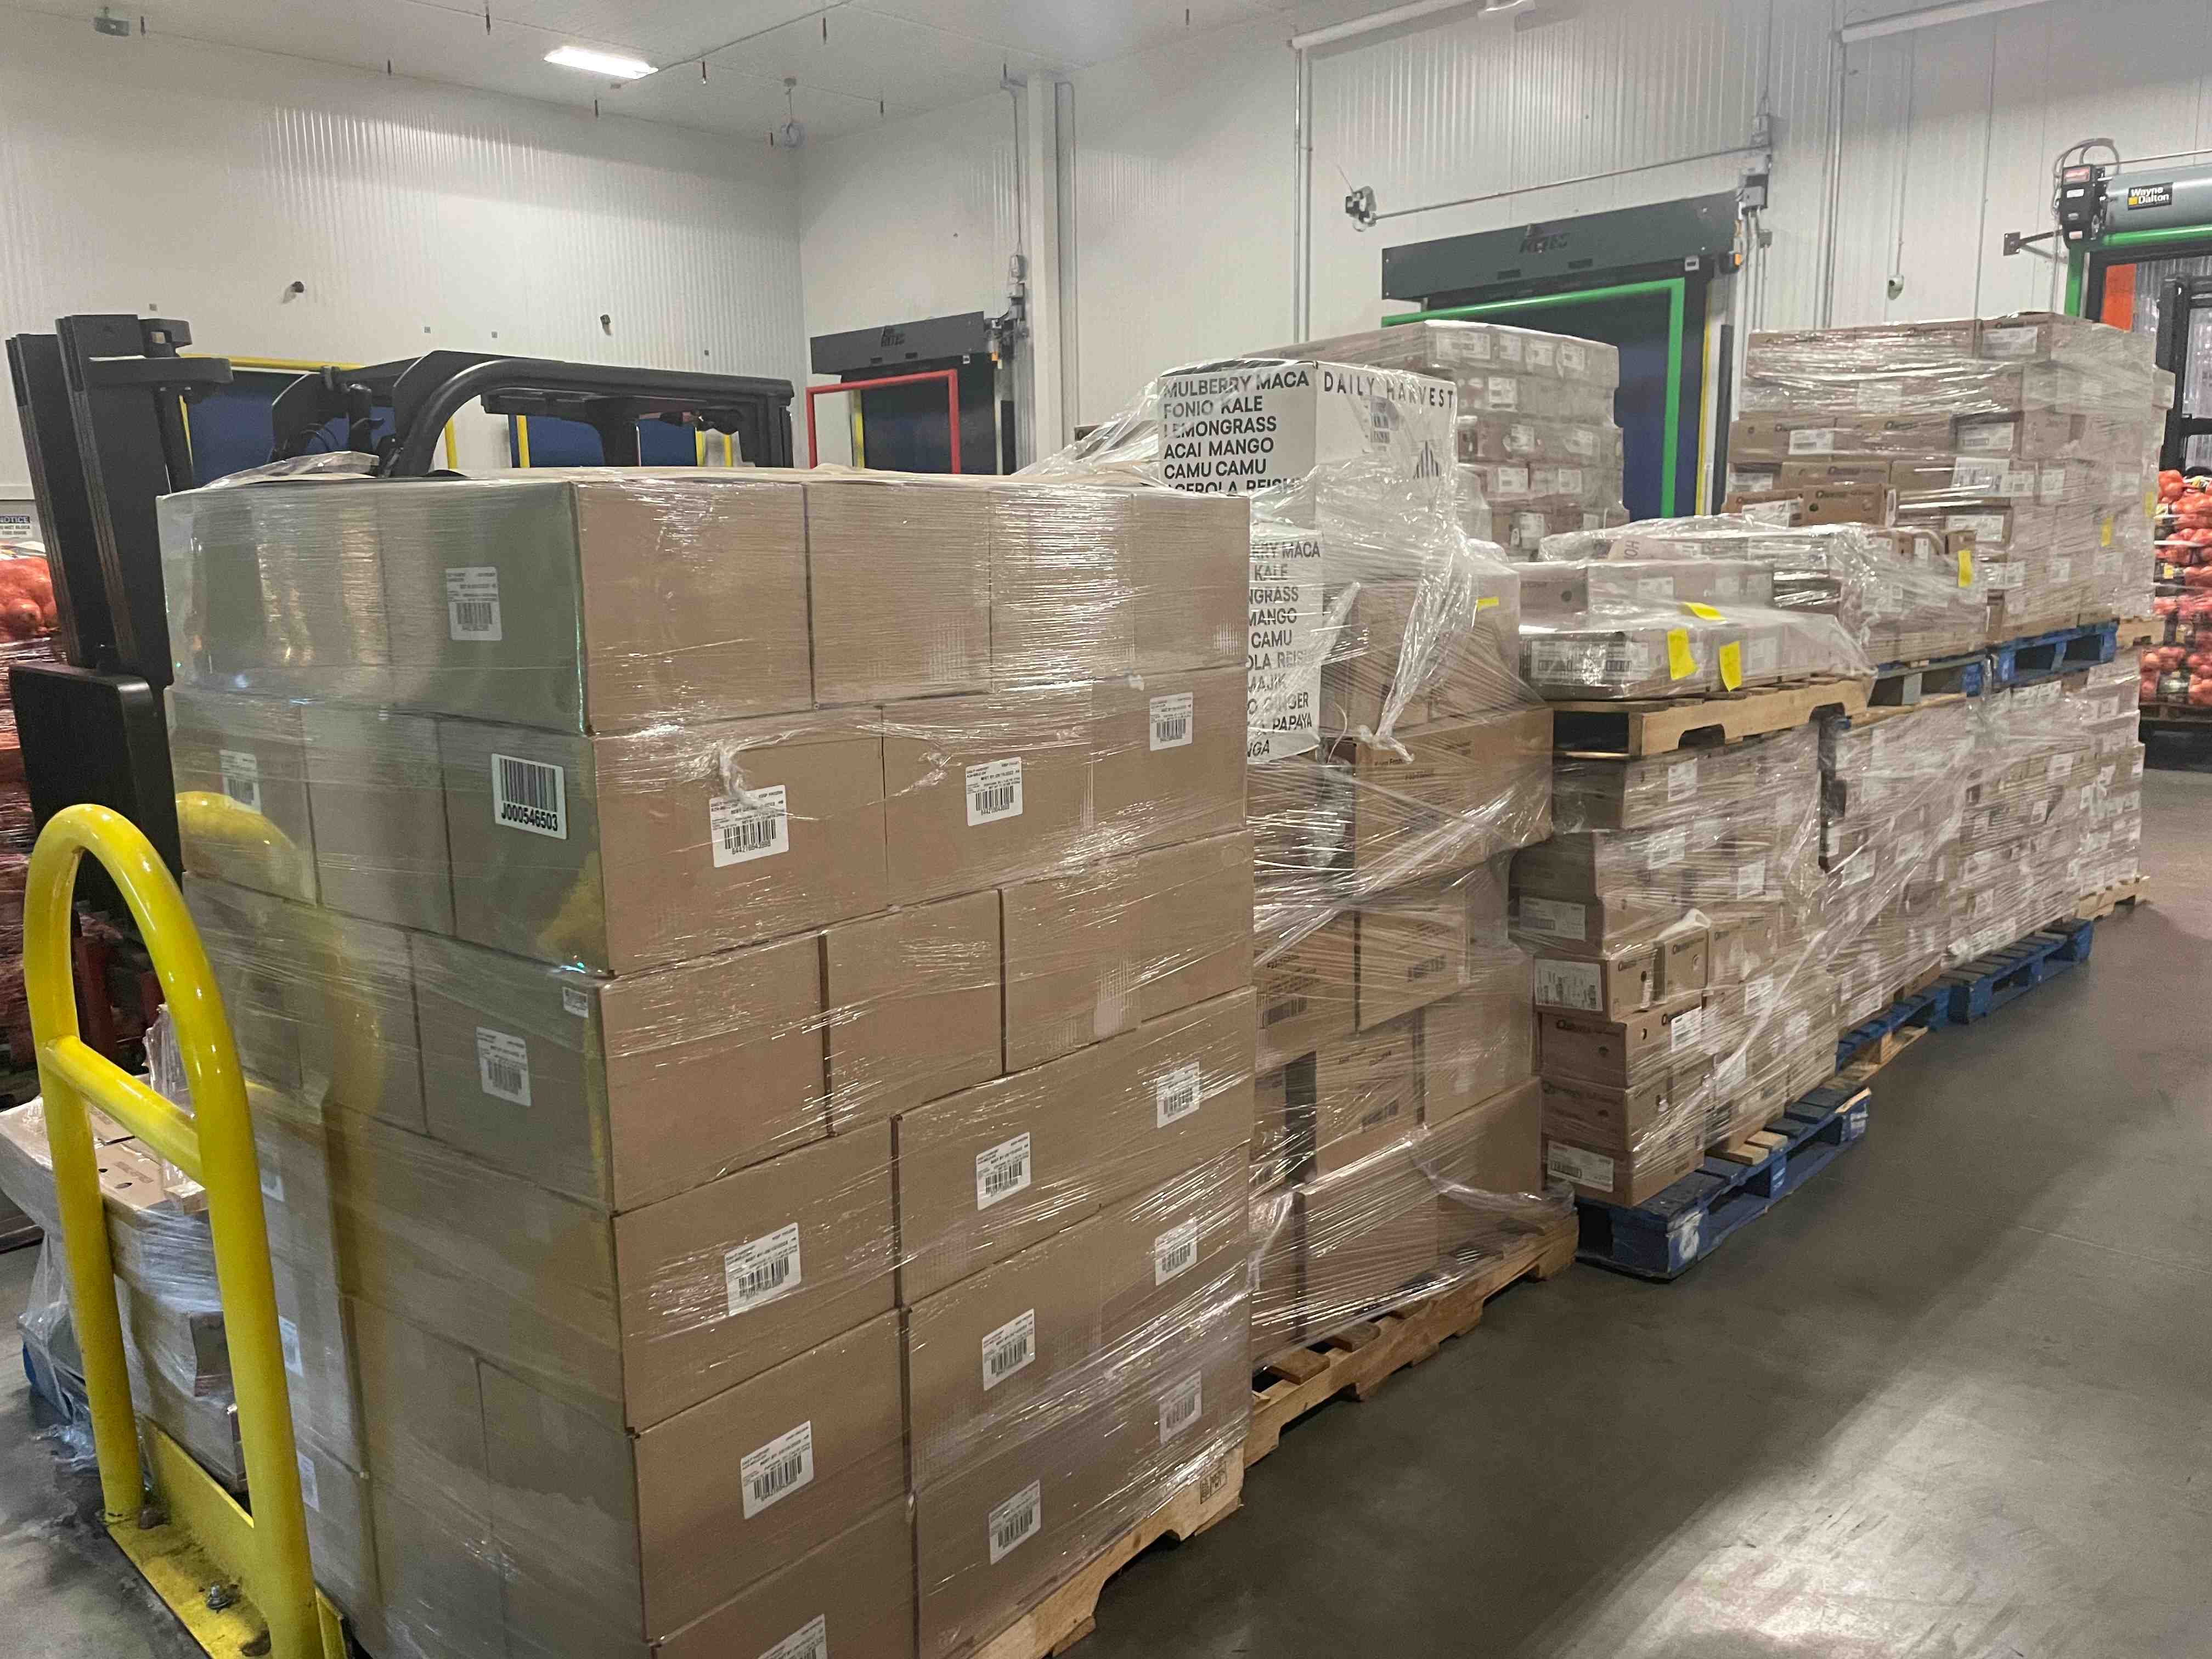 Pallets of donated food from Daily Harvest